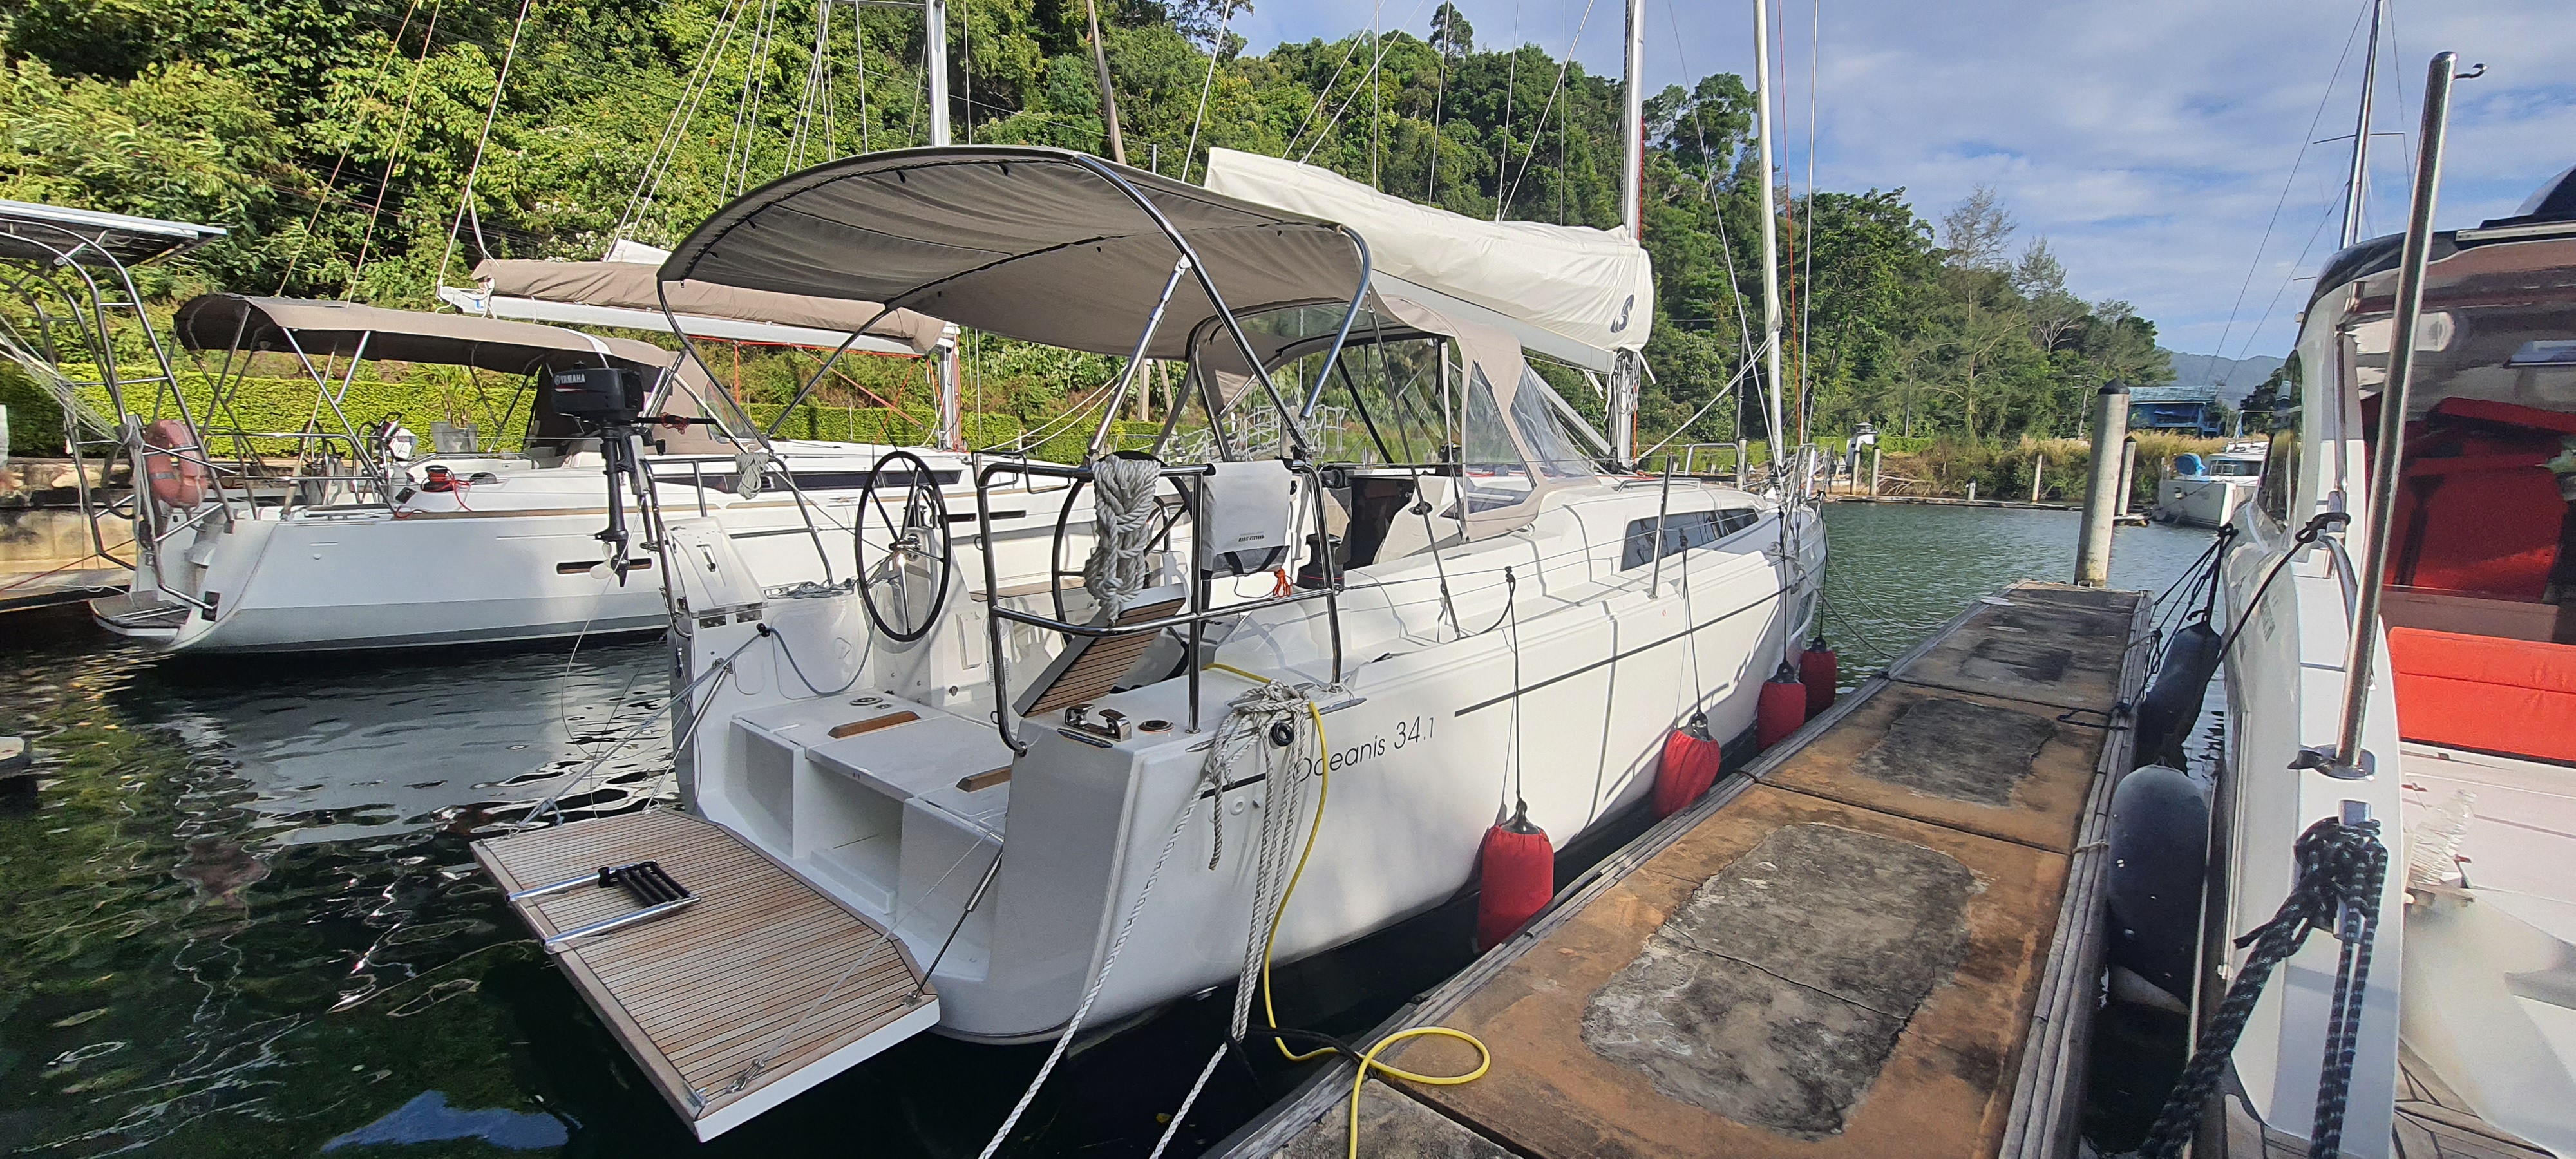 Oceanis 34.1 - Yacht Charter Koh Chang & Boat hire in Thailand Koh Chang Ao Salak Phet 4